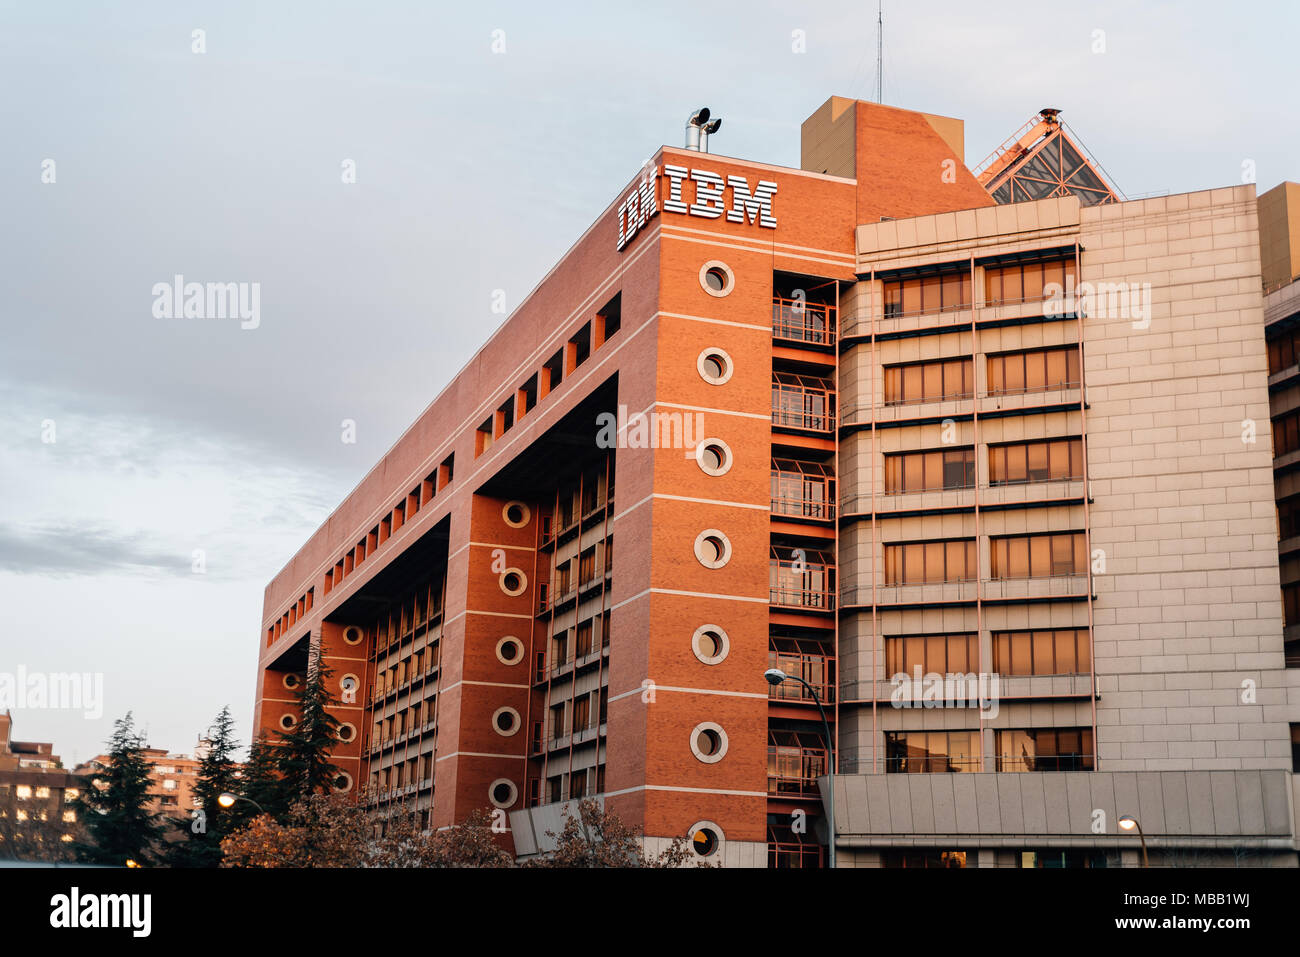 Madrid, Spain - January 20, 2018:  IBM headquarter office building in Madrid. Low angle view Stock Photo